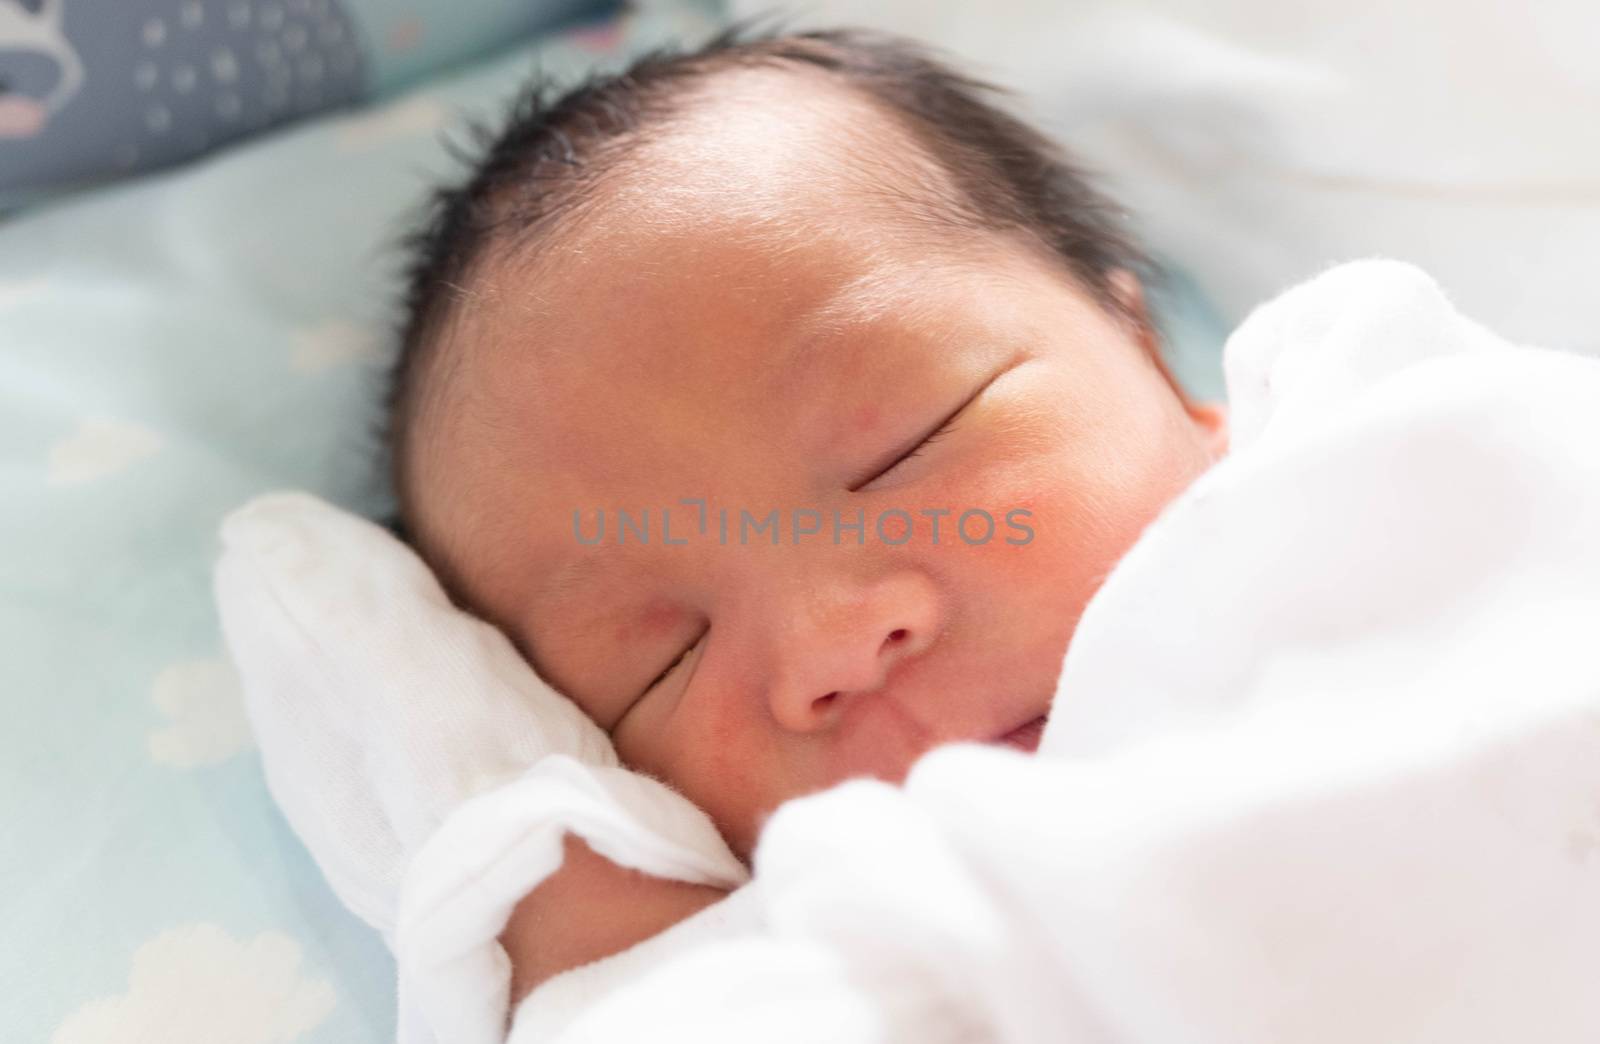 The Sleeping cute New Born Baby infant on the bed by Bonn2210